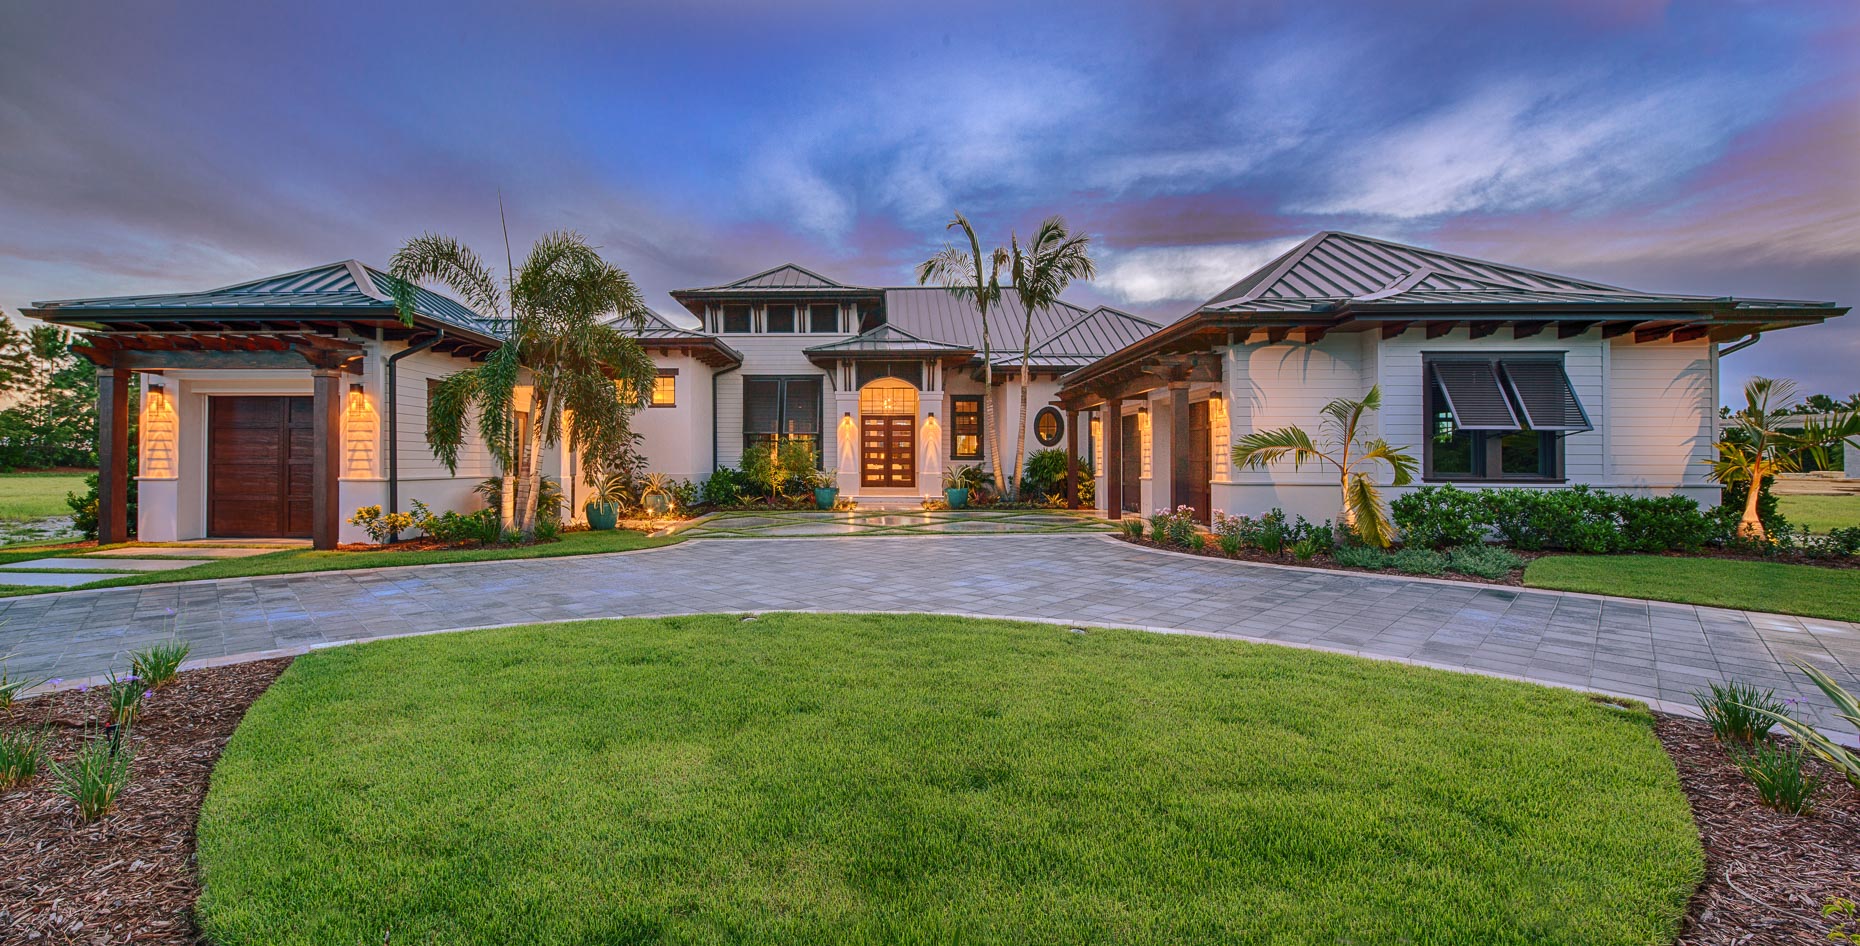 Model Home, Coastal West Indies Architecture - Mark Borosch Photography - Lakewood Ranch, FL